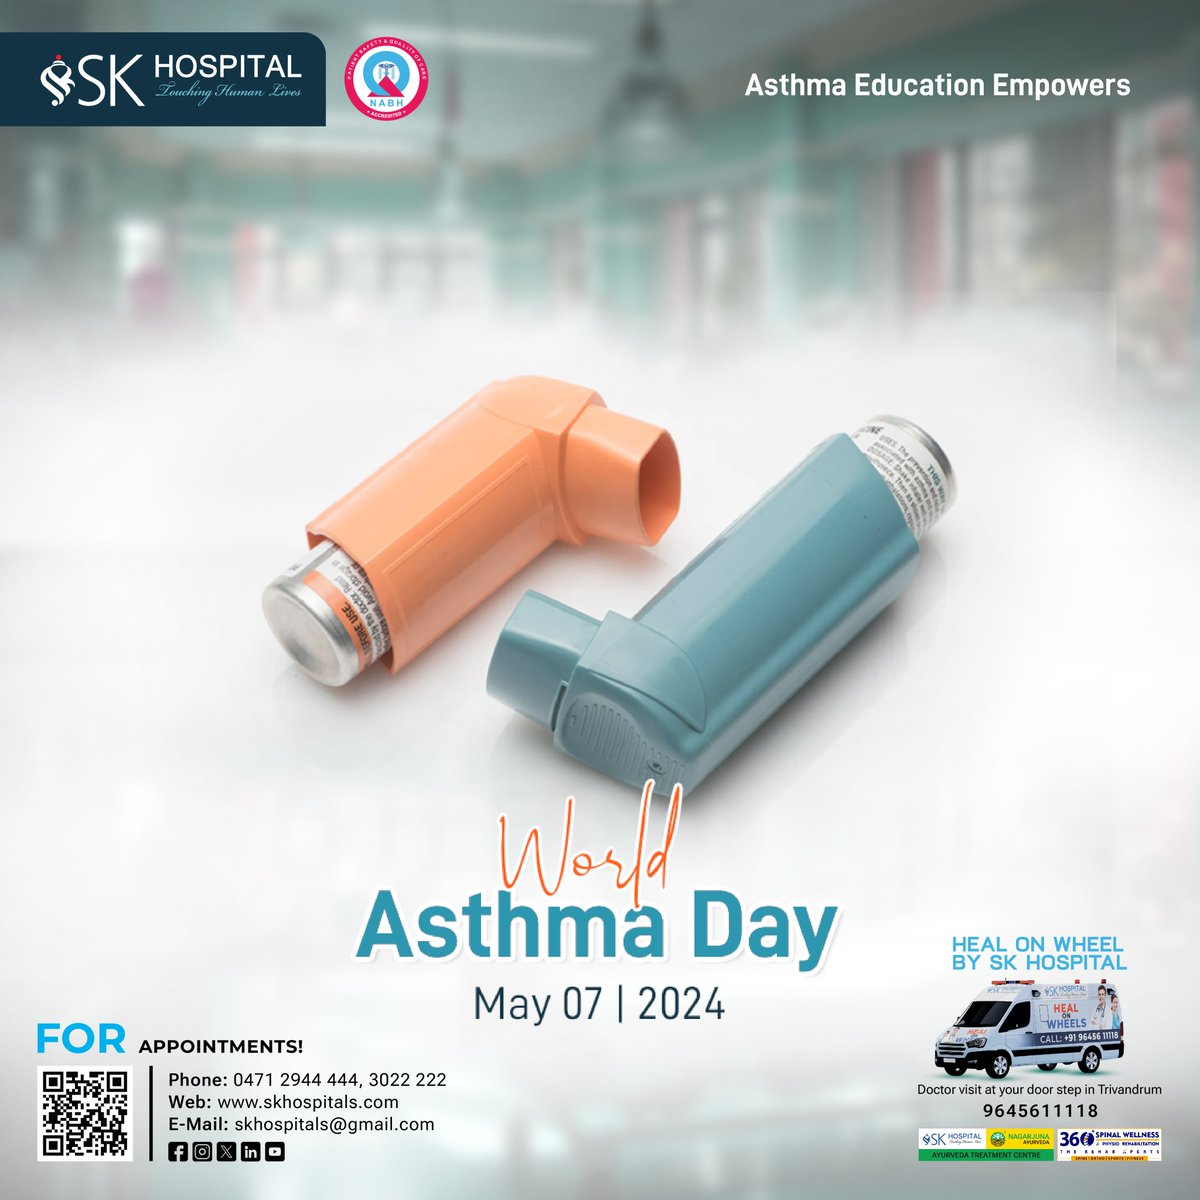 Together, we can control asthma. Let's champion healthy lungs on World Asthma Day 🧑🏻‍⚕️

#SKHospital #trivandrum #Hospital #WorldAsthmaDay #asthmaawarenessmonth #AsthmaControl #HealthyLungs #BreatheEasy

[ SK Hospital in Trivandrum, World Asthma Day, Healthy Lungs ]